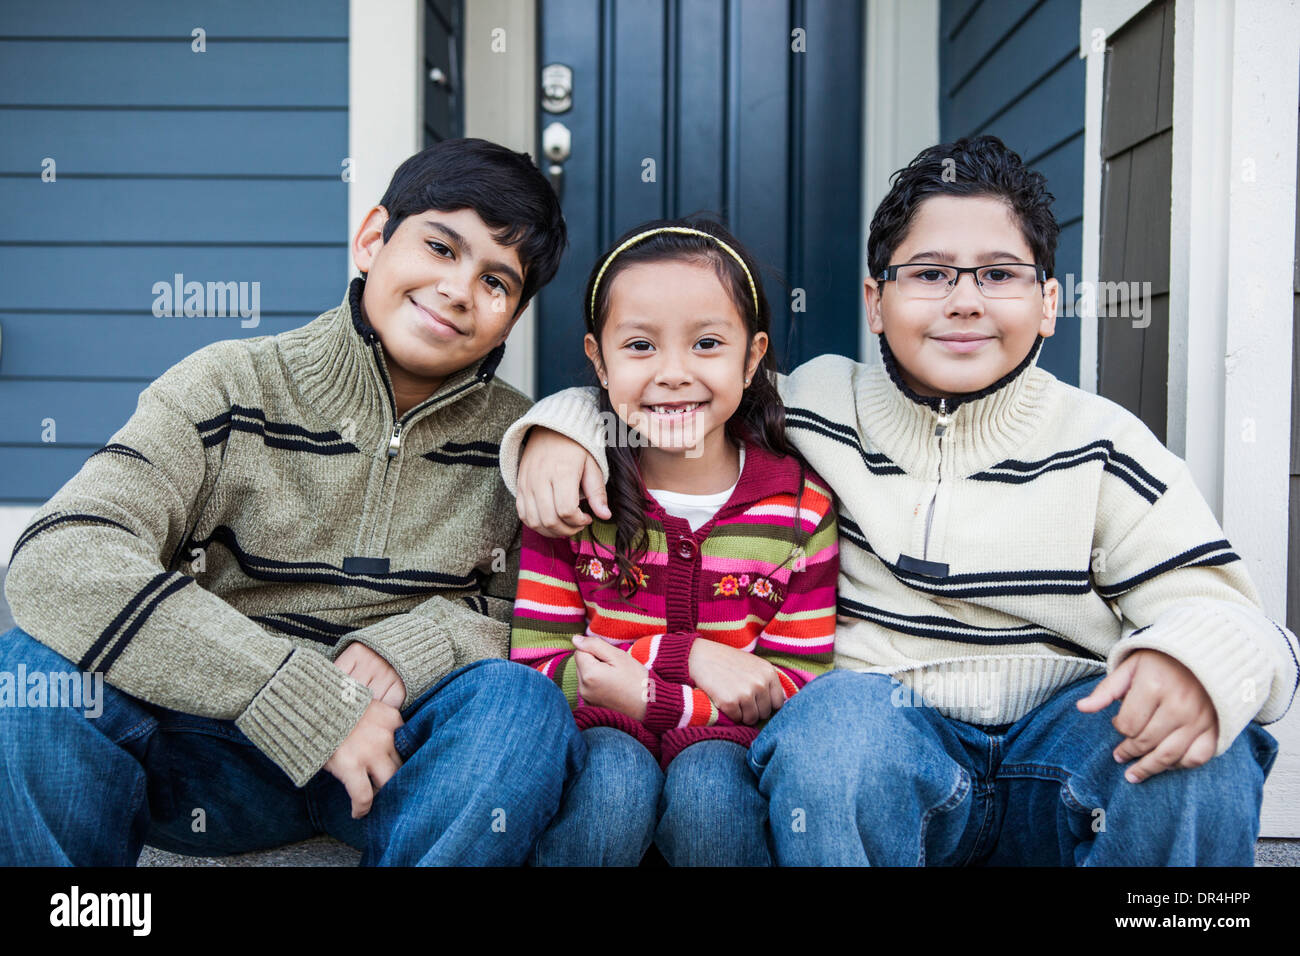 Children smiling together on front stoop Stock Photo